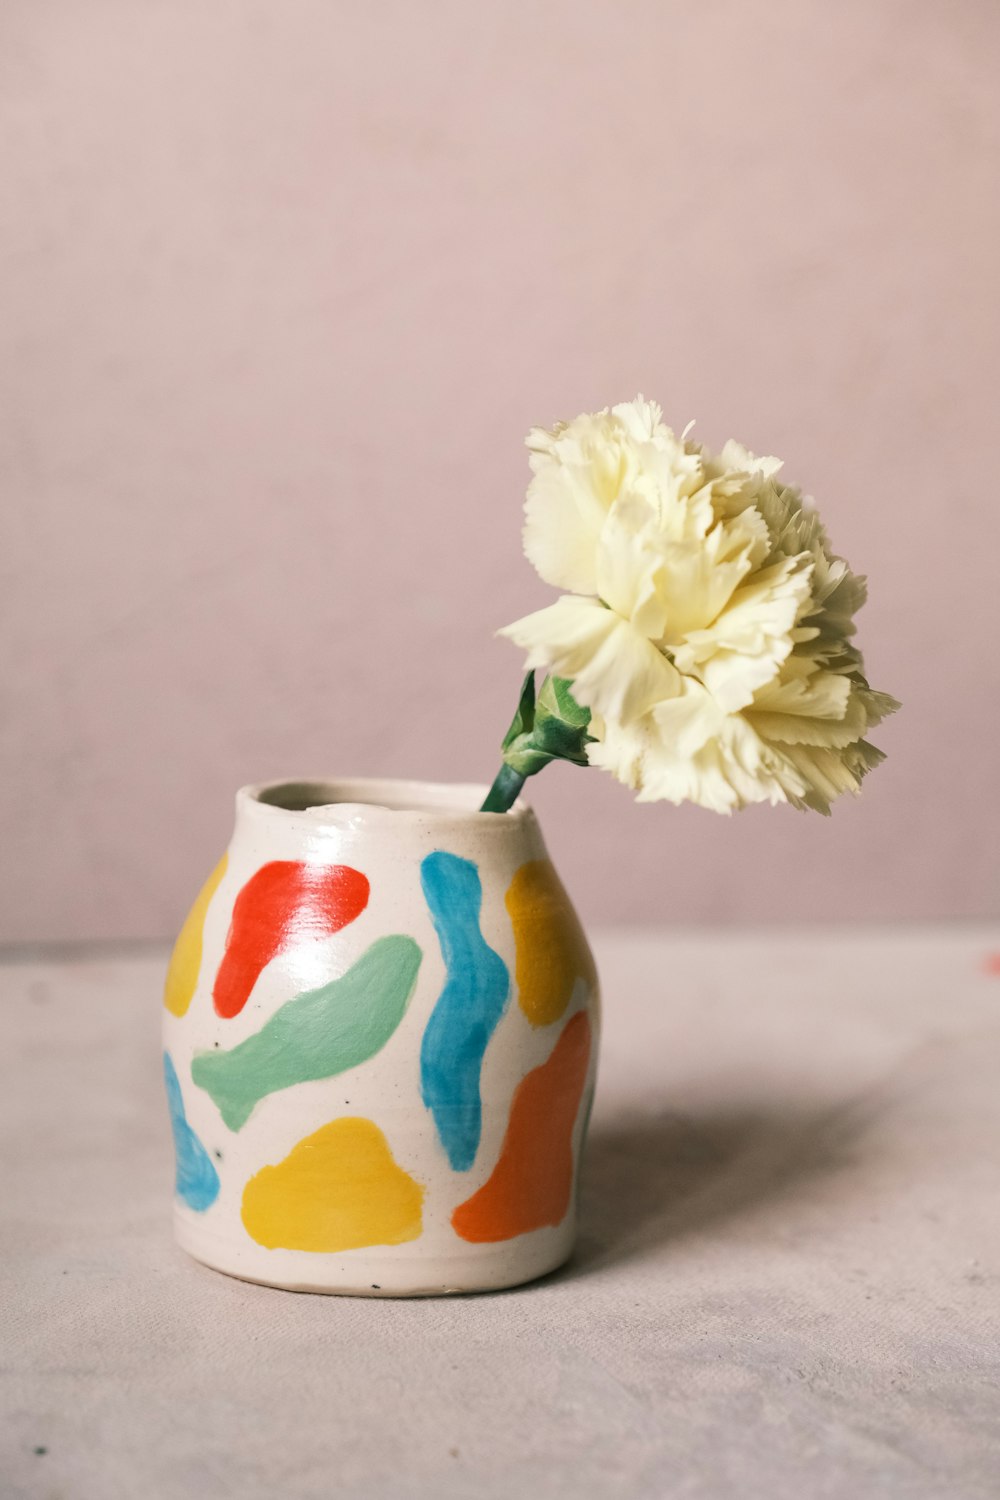 white and yellow flower in white blue and green ceramic vase